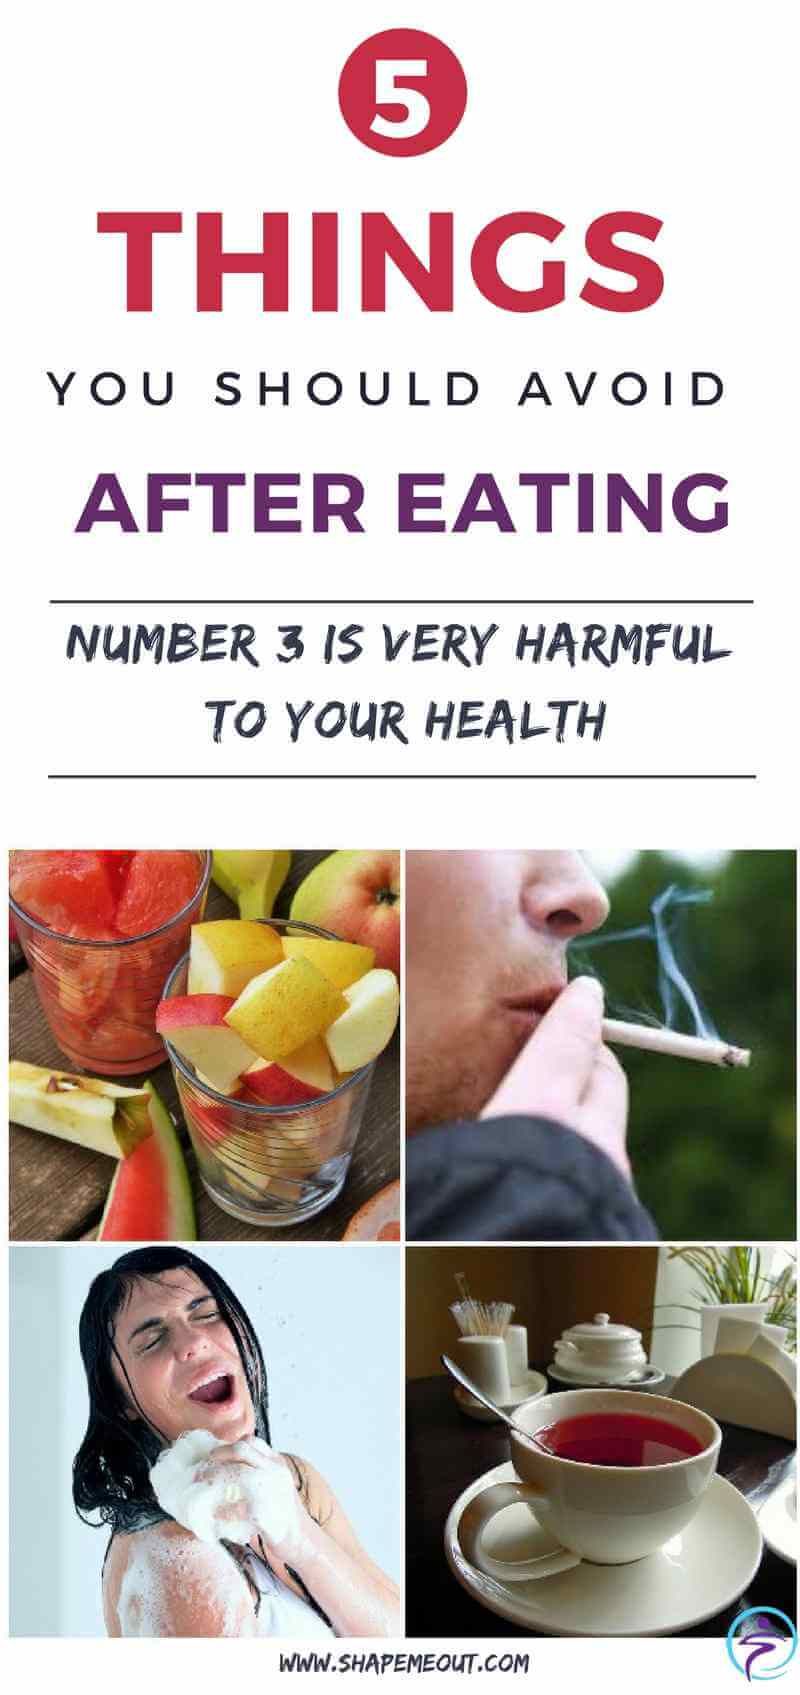 What You Should Avoid After Eating Number 3 Is Very Harmful To Health